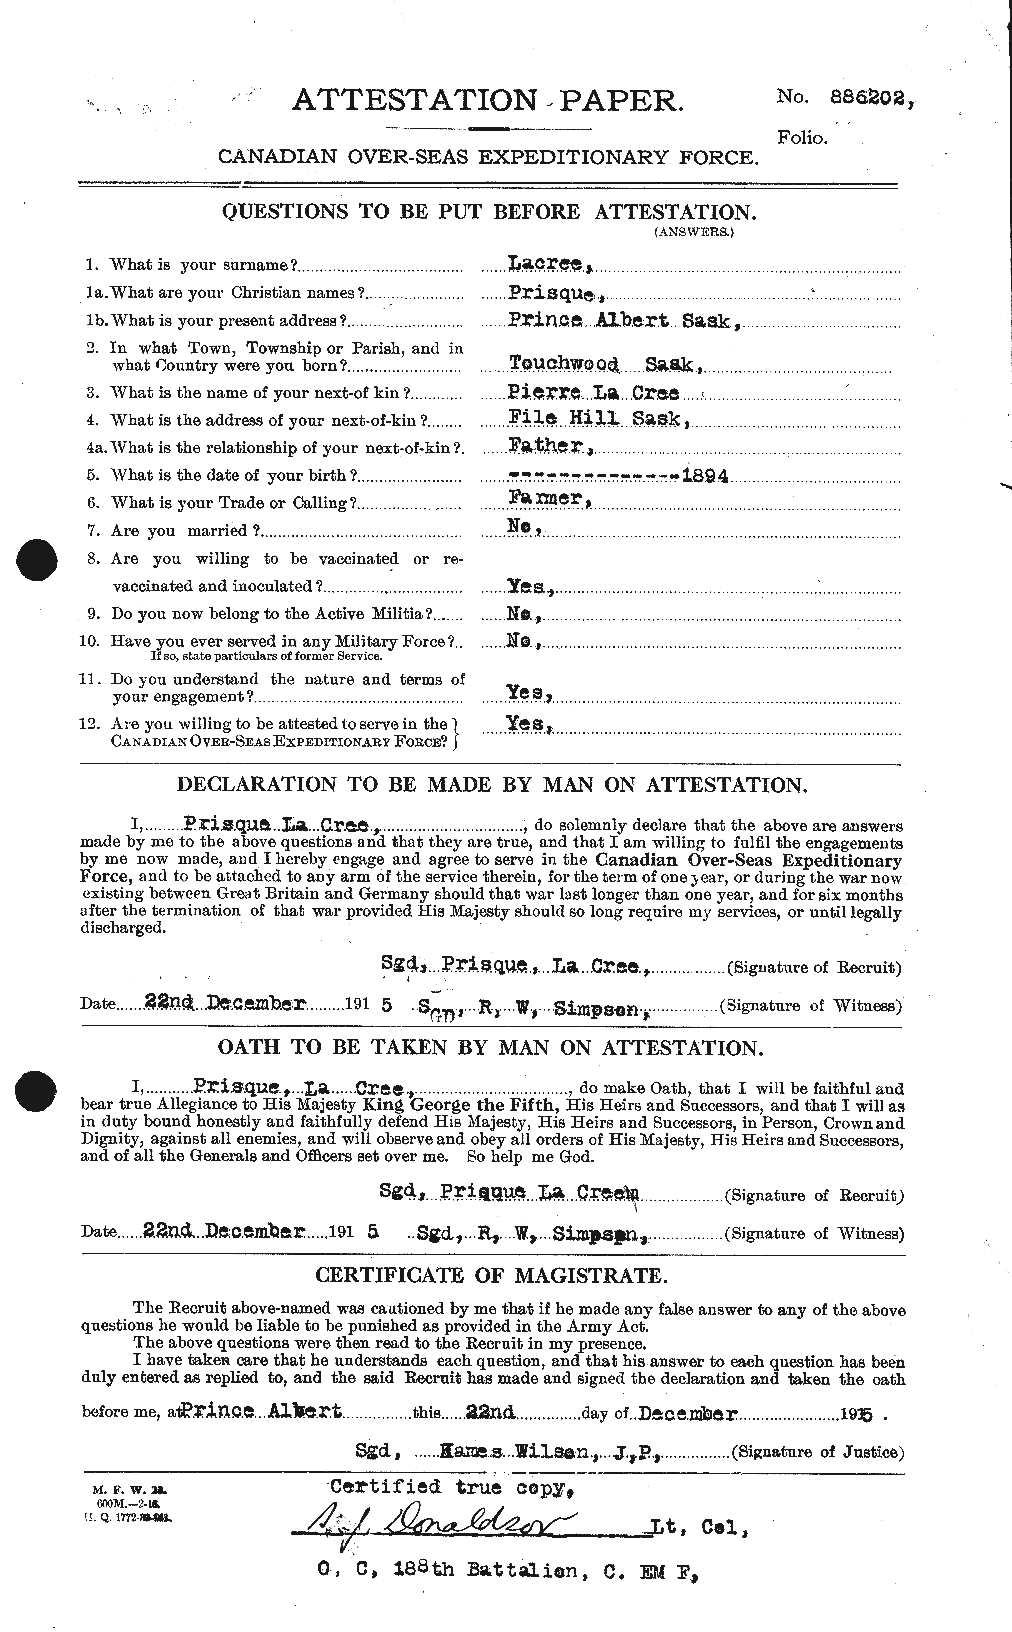 Personnel Records of the First World War - CEF 442221a